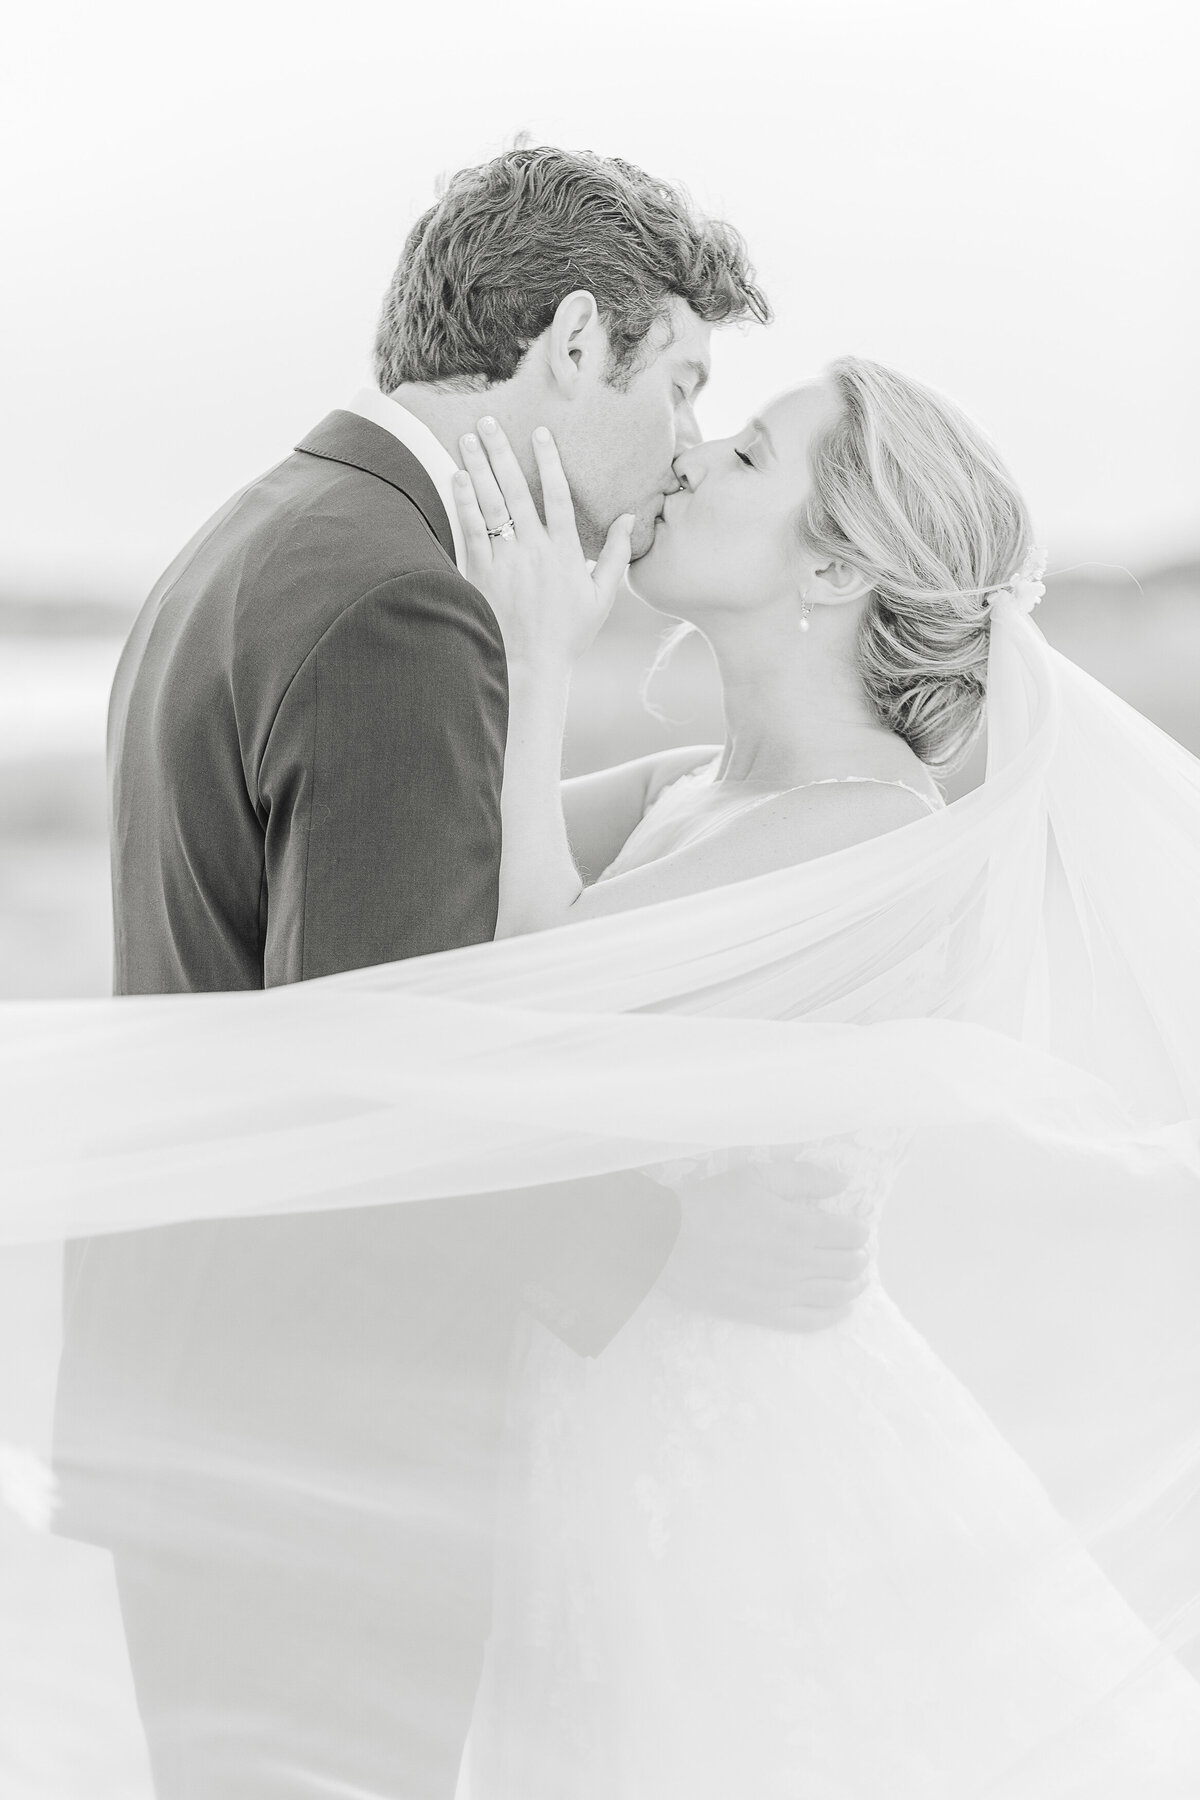 A bride and groom share a kiss along the shores of the Wychmere Beach Club in Harwichport, MA for a formal wedding portrait. The bride's hands are gently resting on her groom's neck, the groom's hands resting around the bride's waist. The bride's veil is blowing in front of them. Captured by MA Wedding Photographer Lia Rose Weddings